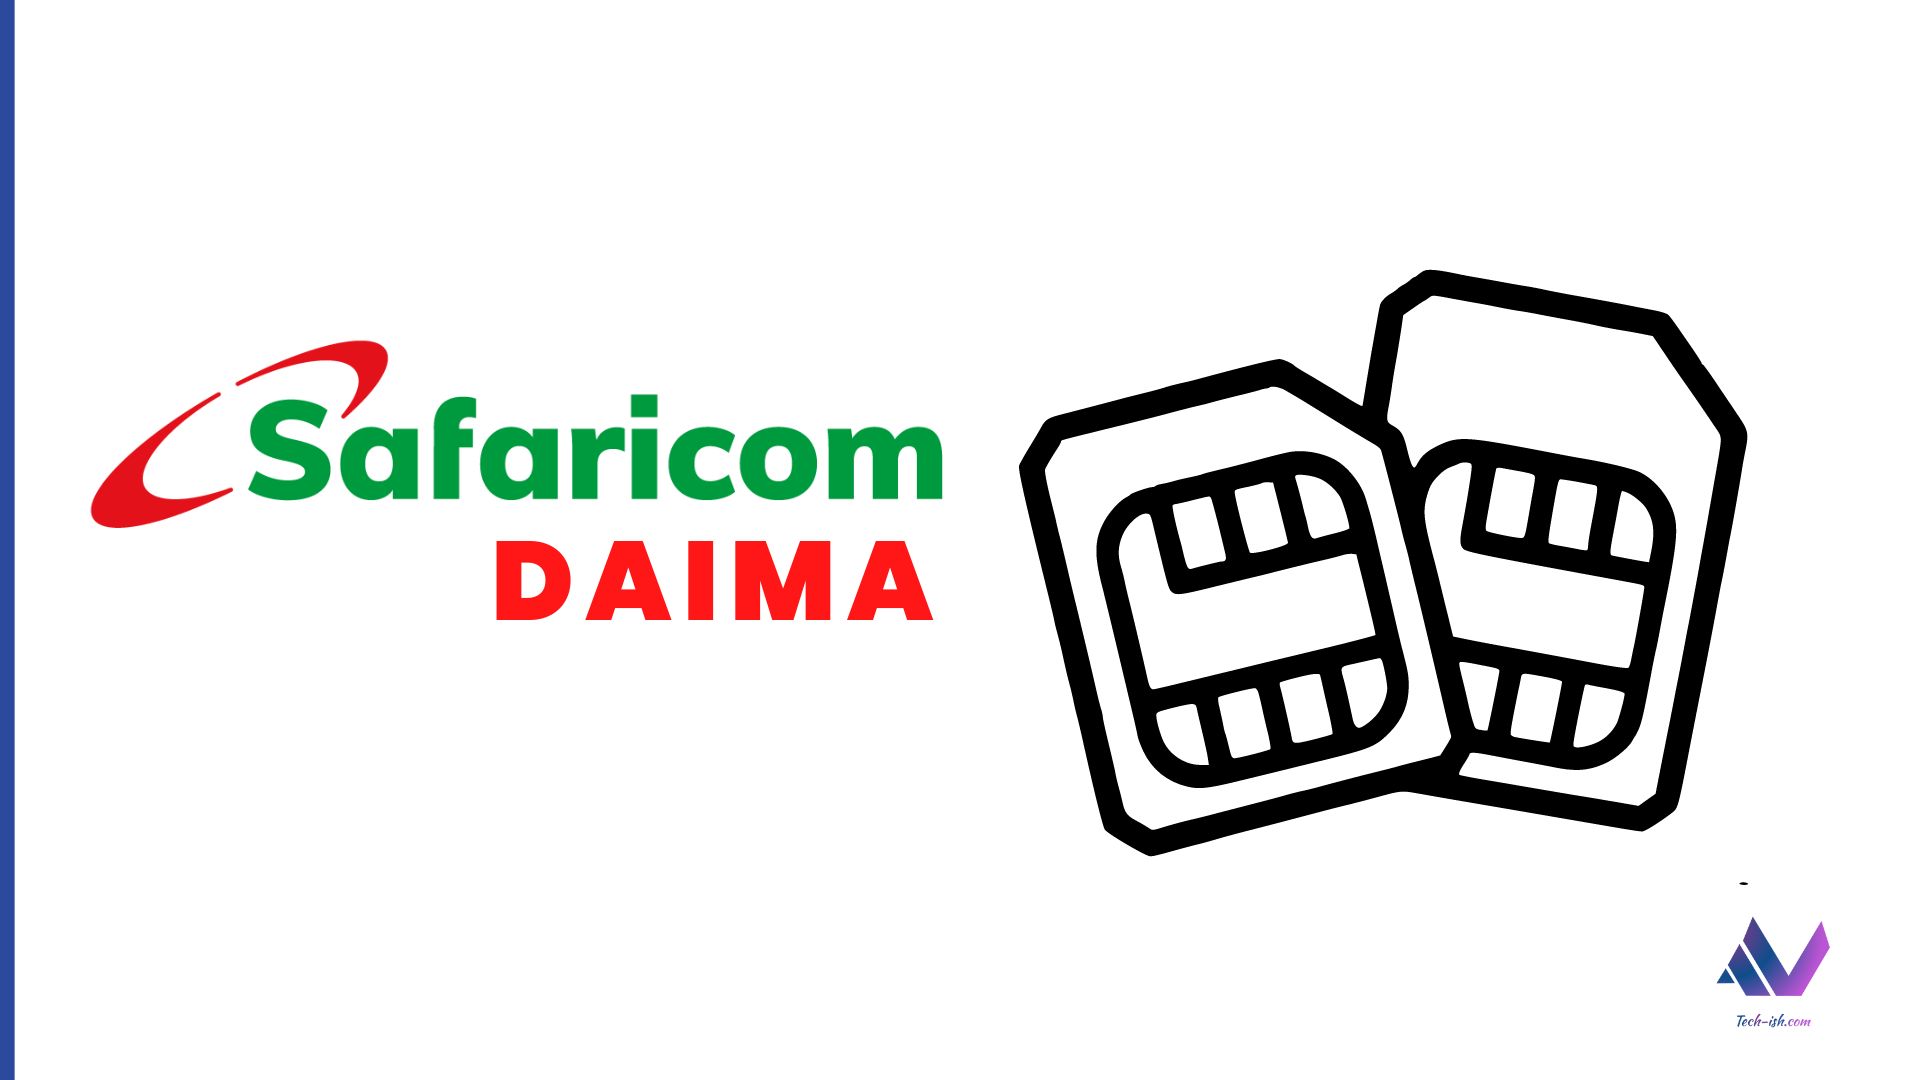 Safaricom Daima let's you keep your line active even when you're not using it